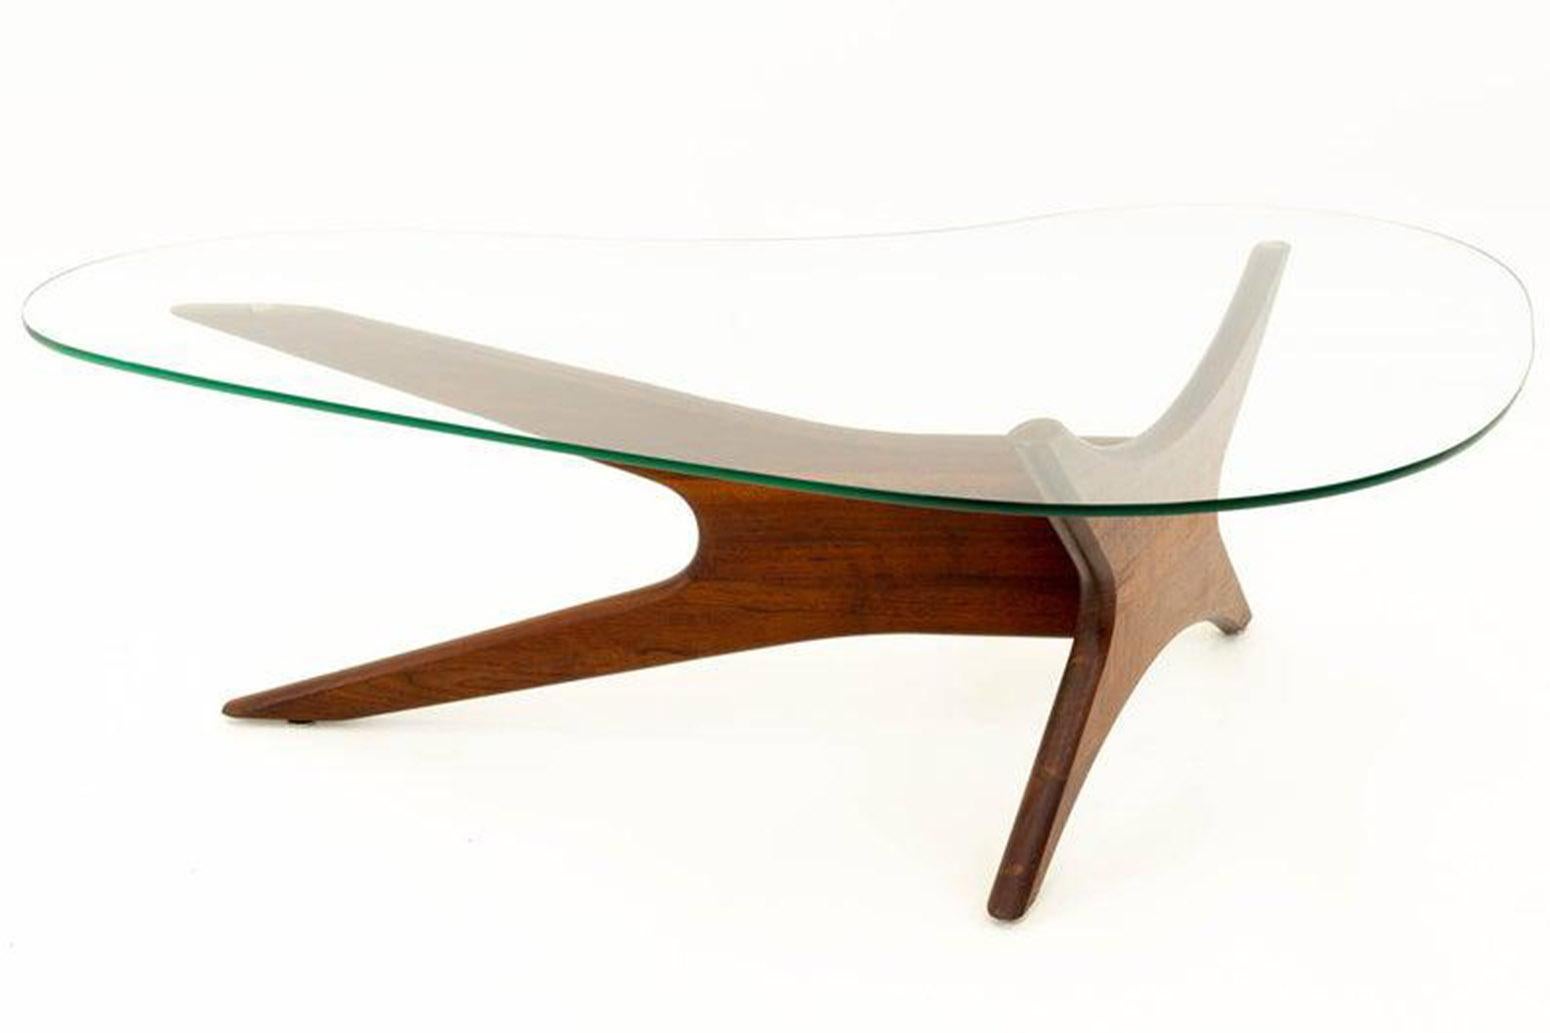 Adrian Pearsall Mid Century sculptural kidney shaped walnut coffee table
Measures: 50 wide x 32 deep x 16 inches high

Each piece of furniture is available in what we call restored vintage condition. Upon purchase it is thoroughly cleaned and minor